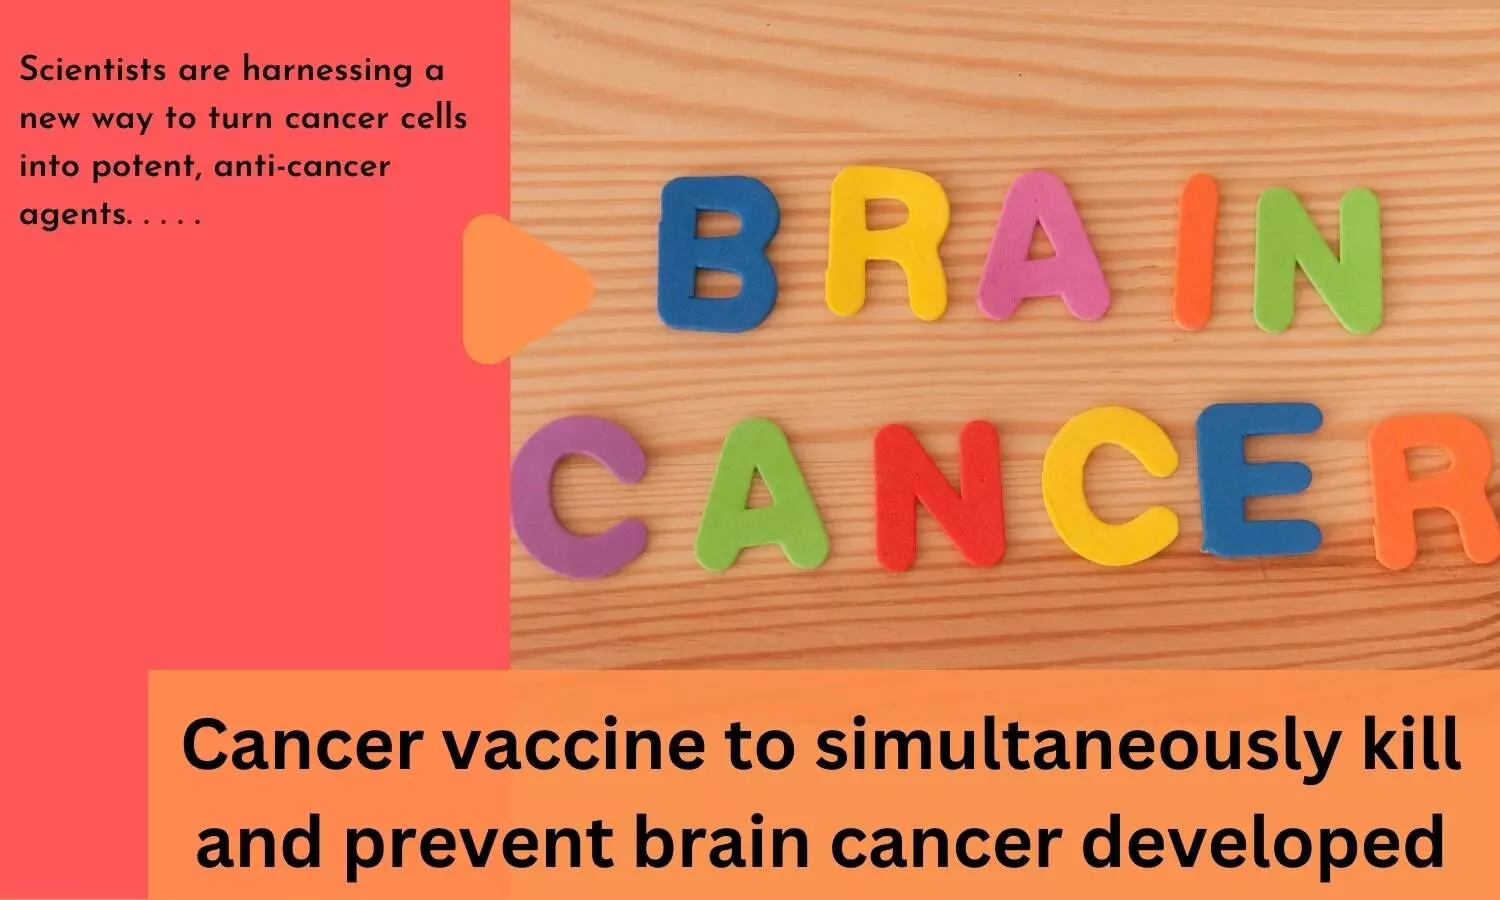 Cancer vaccine to simultaneously kill and prevent brain cancer developed